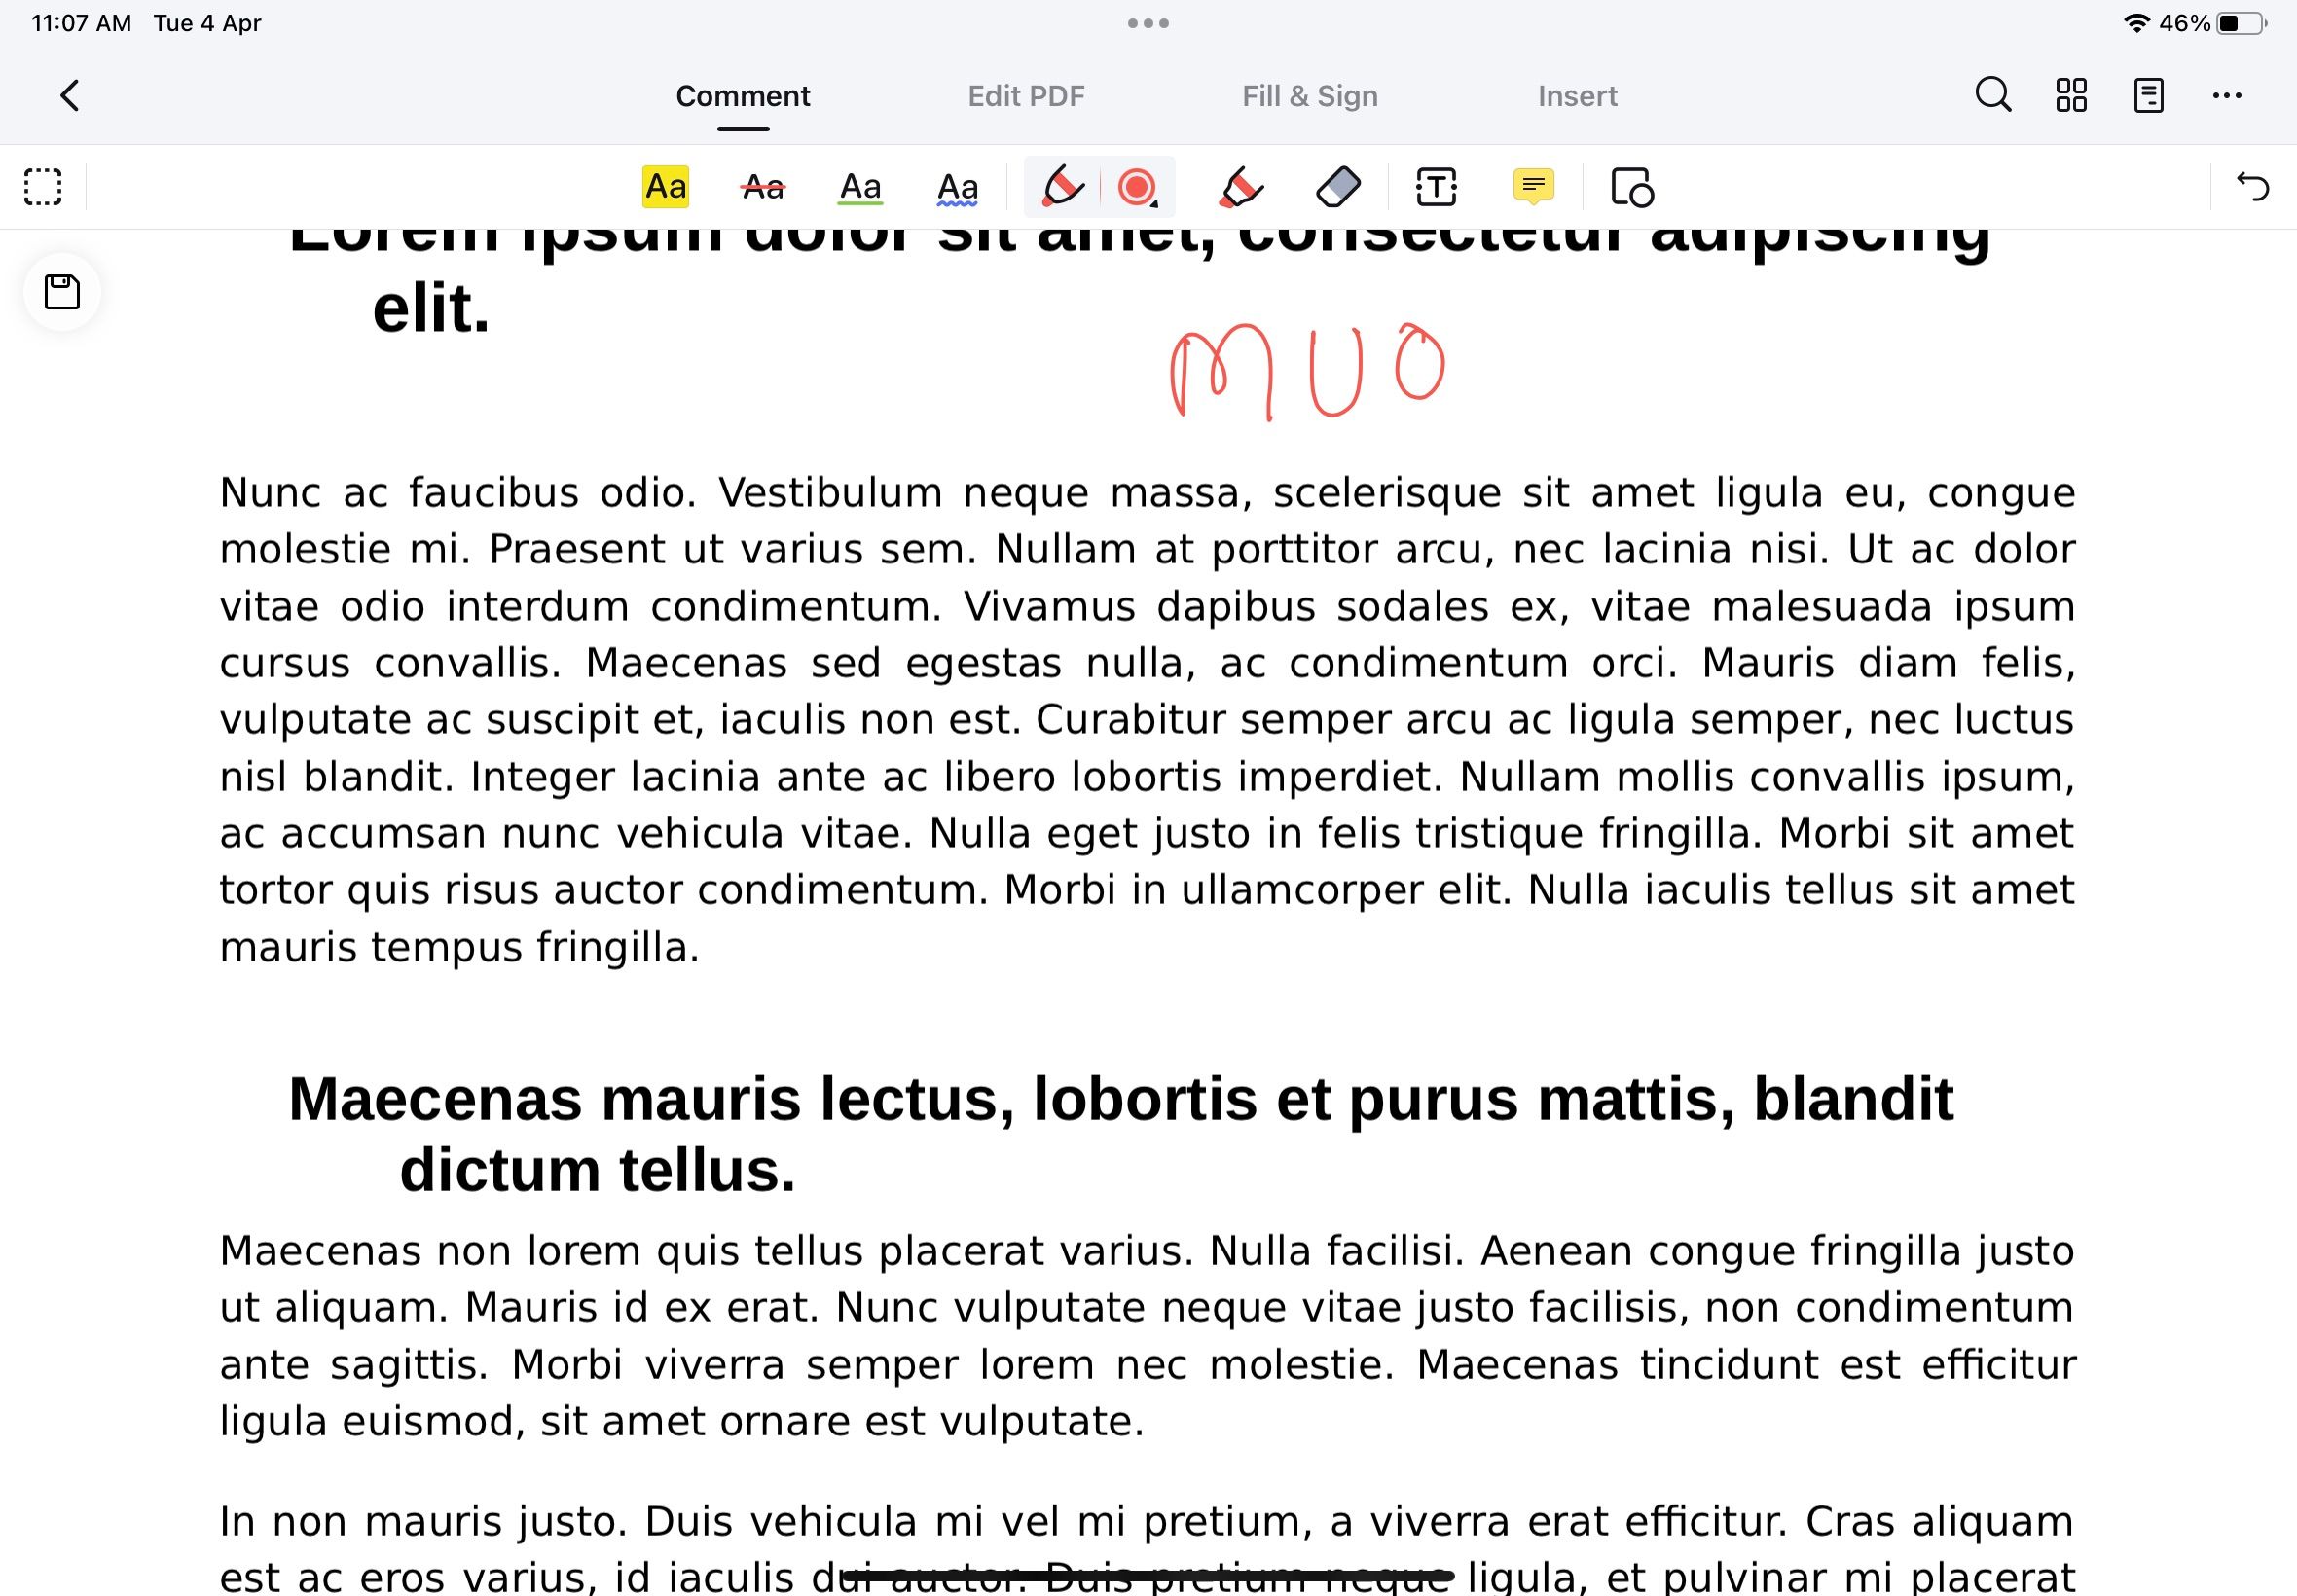 PDFelement app with a PDF open on iPad